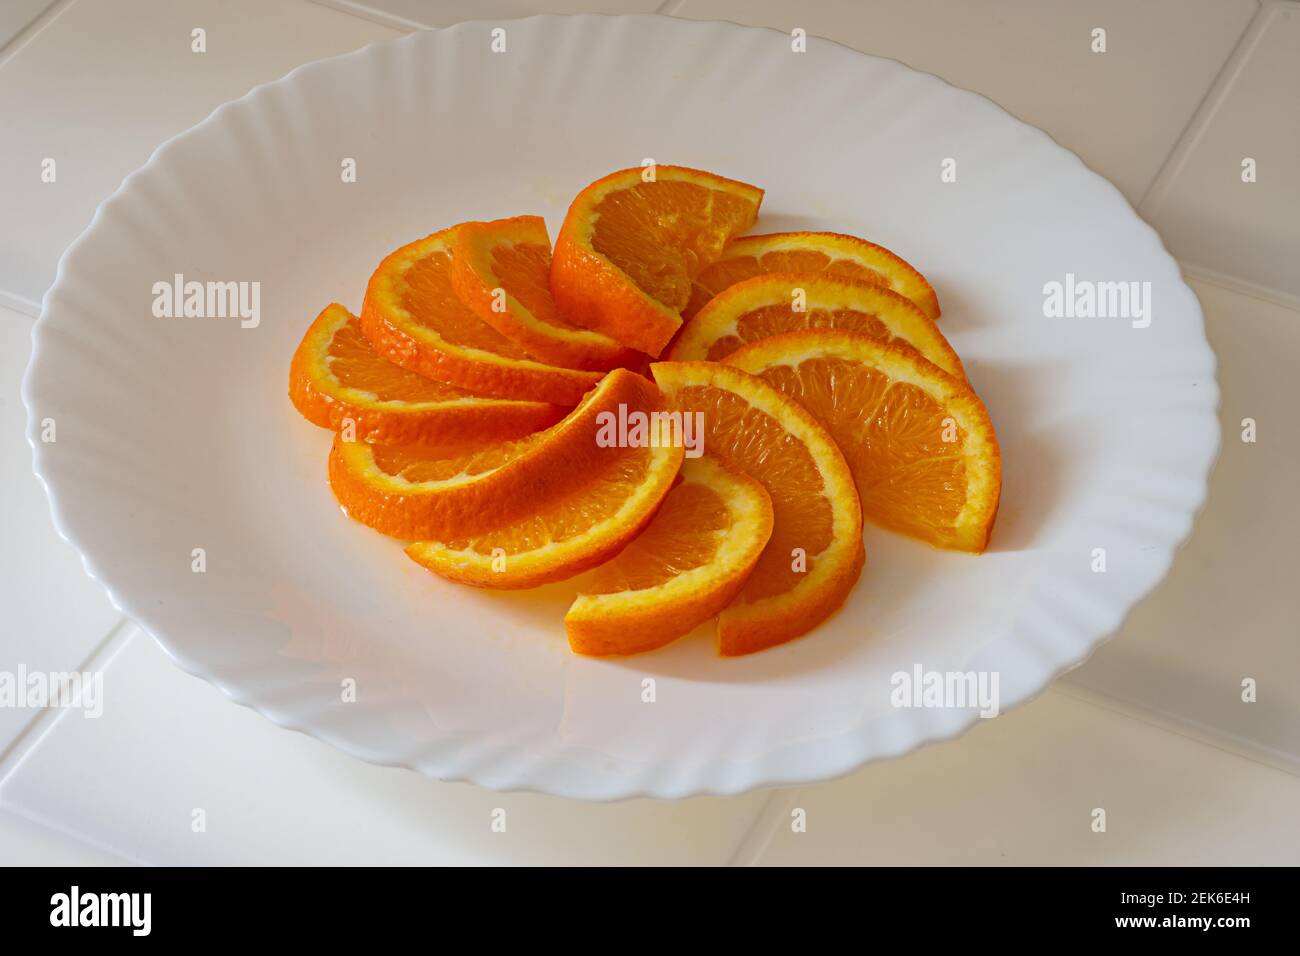 close up of fresh oranges slices on a plate Stock Photo